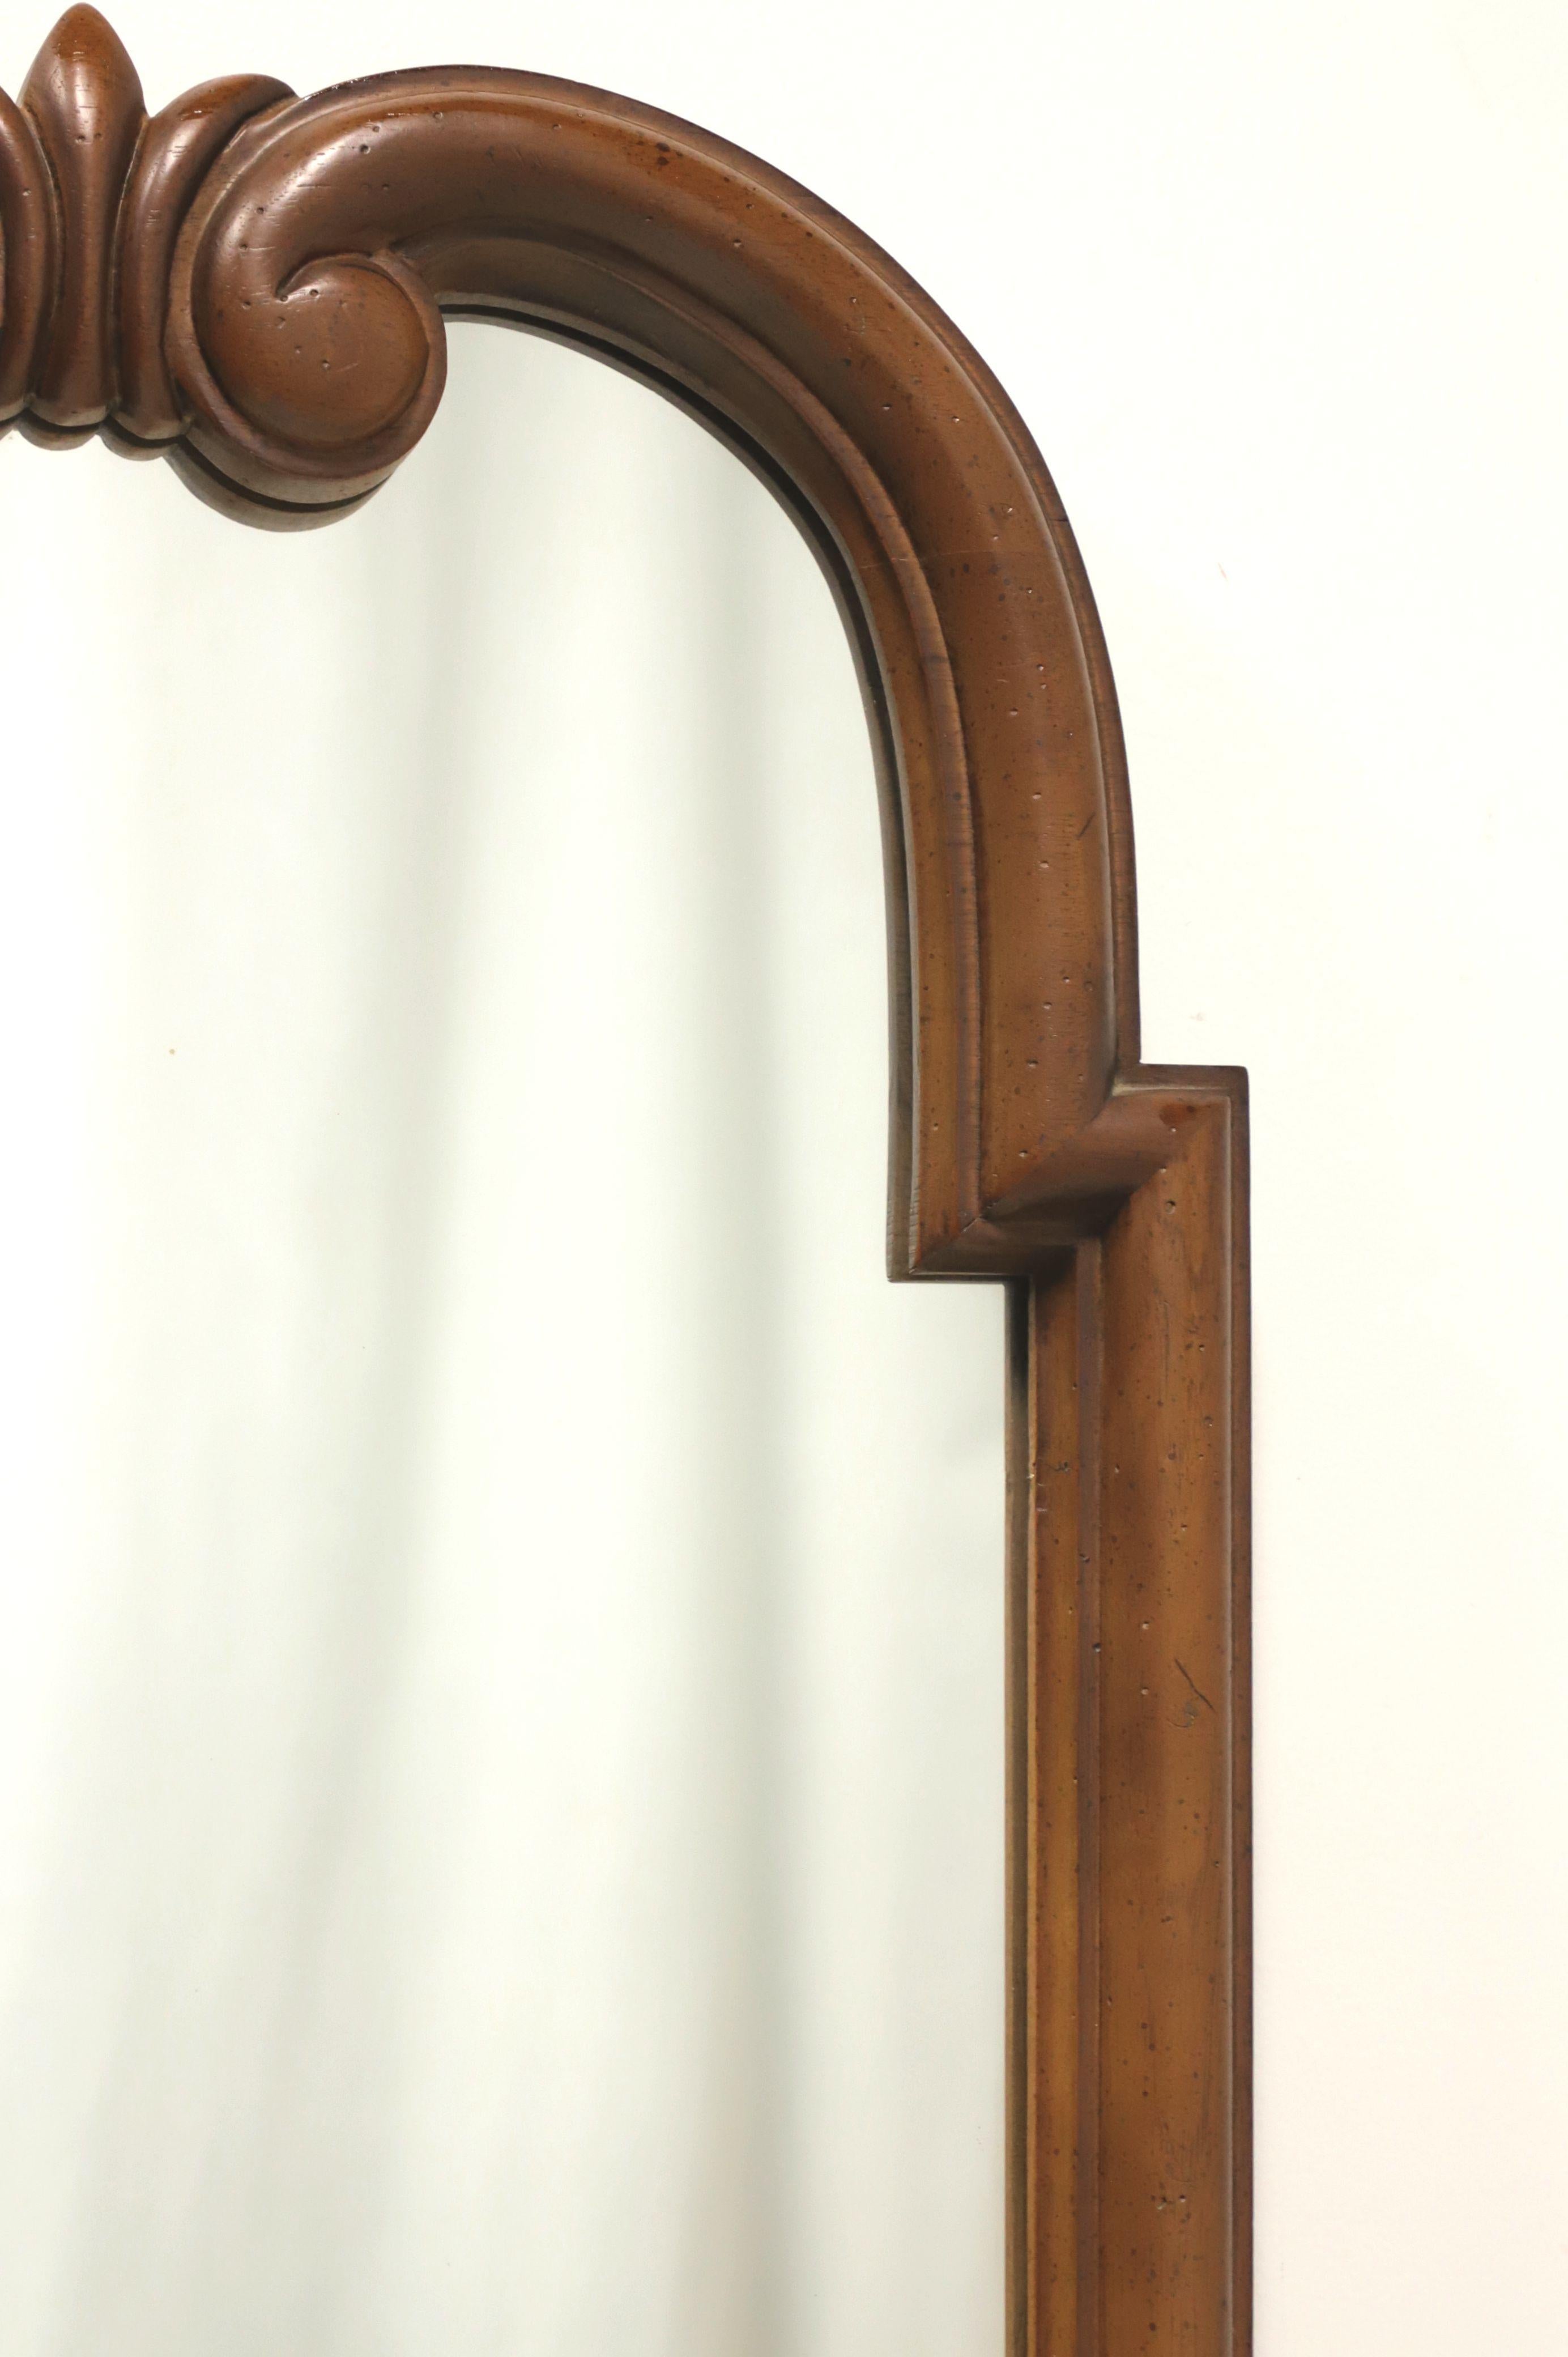 TOMLINSON 1960's Carved Walnut Scroll Regency Style Wall Mirror - A In Good Condition For Sale In Charlotte, NC